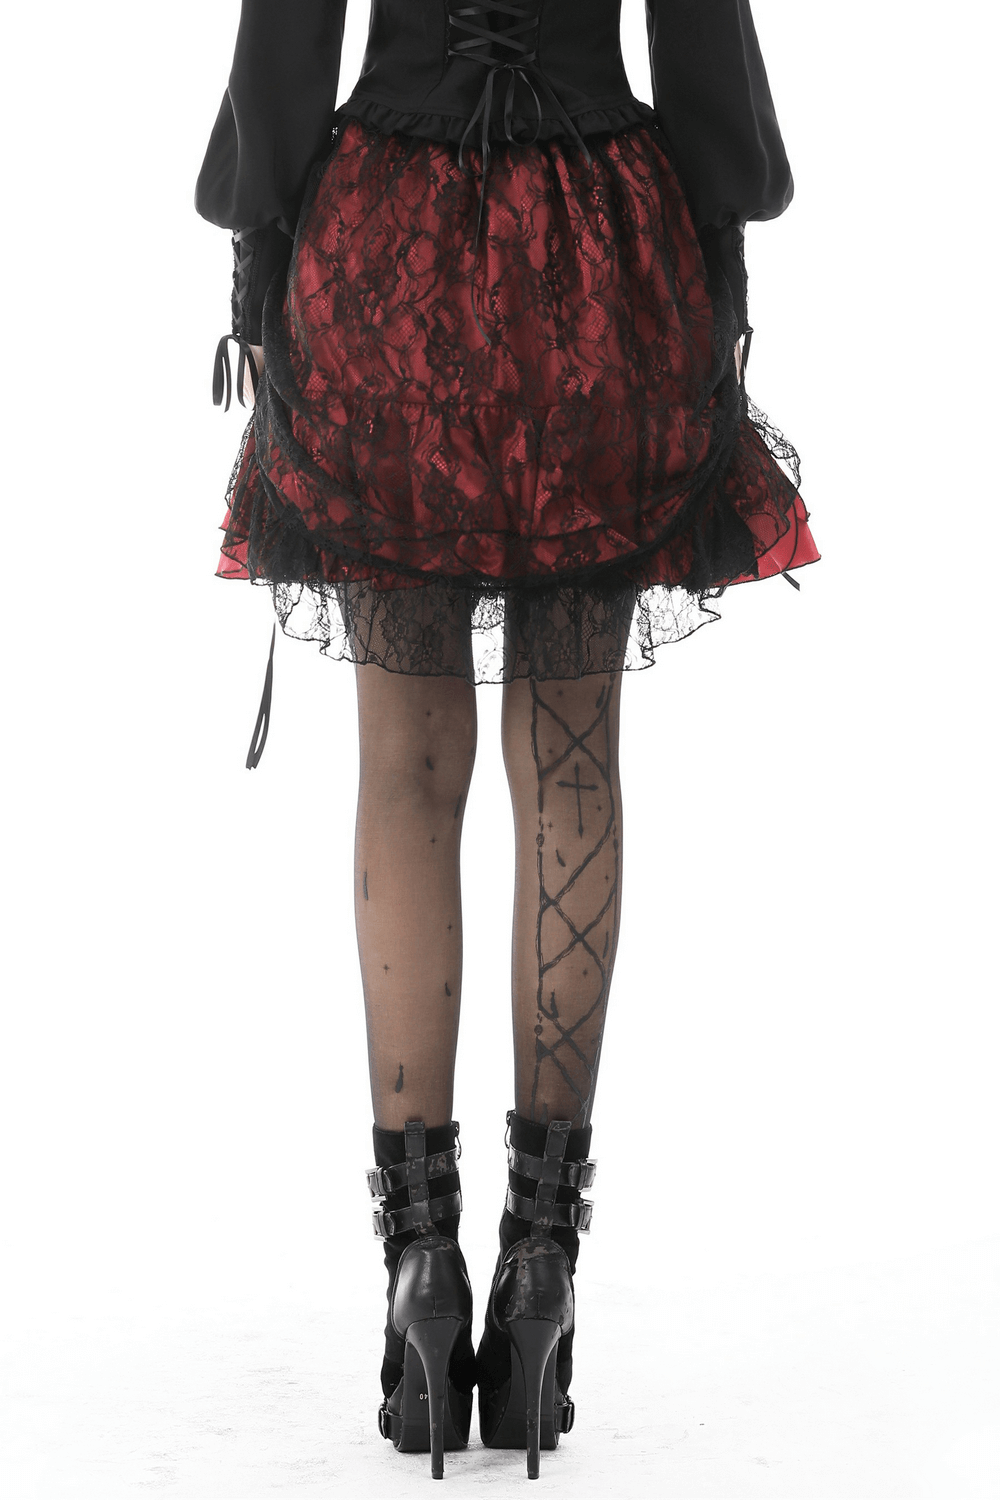 Victorian Gothic Women's Mini Skirt with Lace Cover